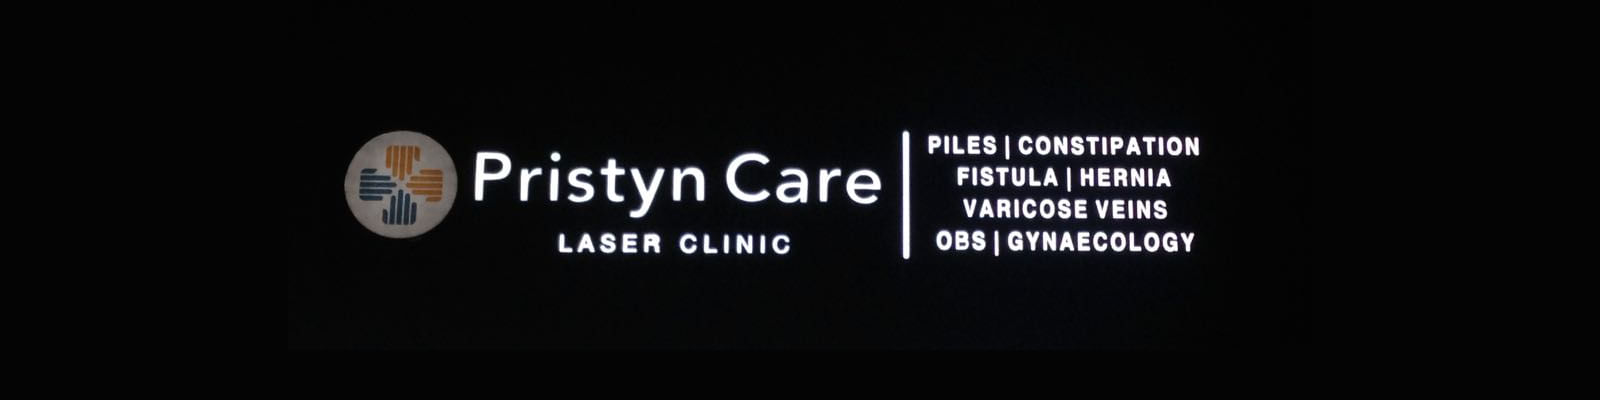 Pristyn Care Clinic, Sector 29